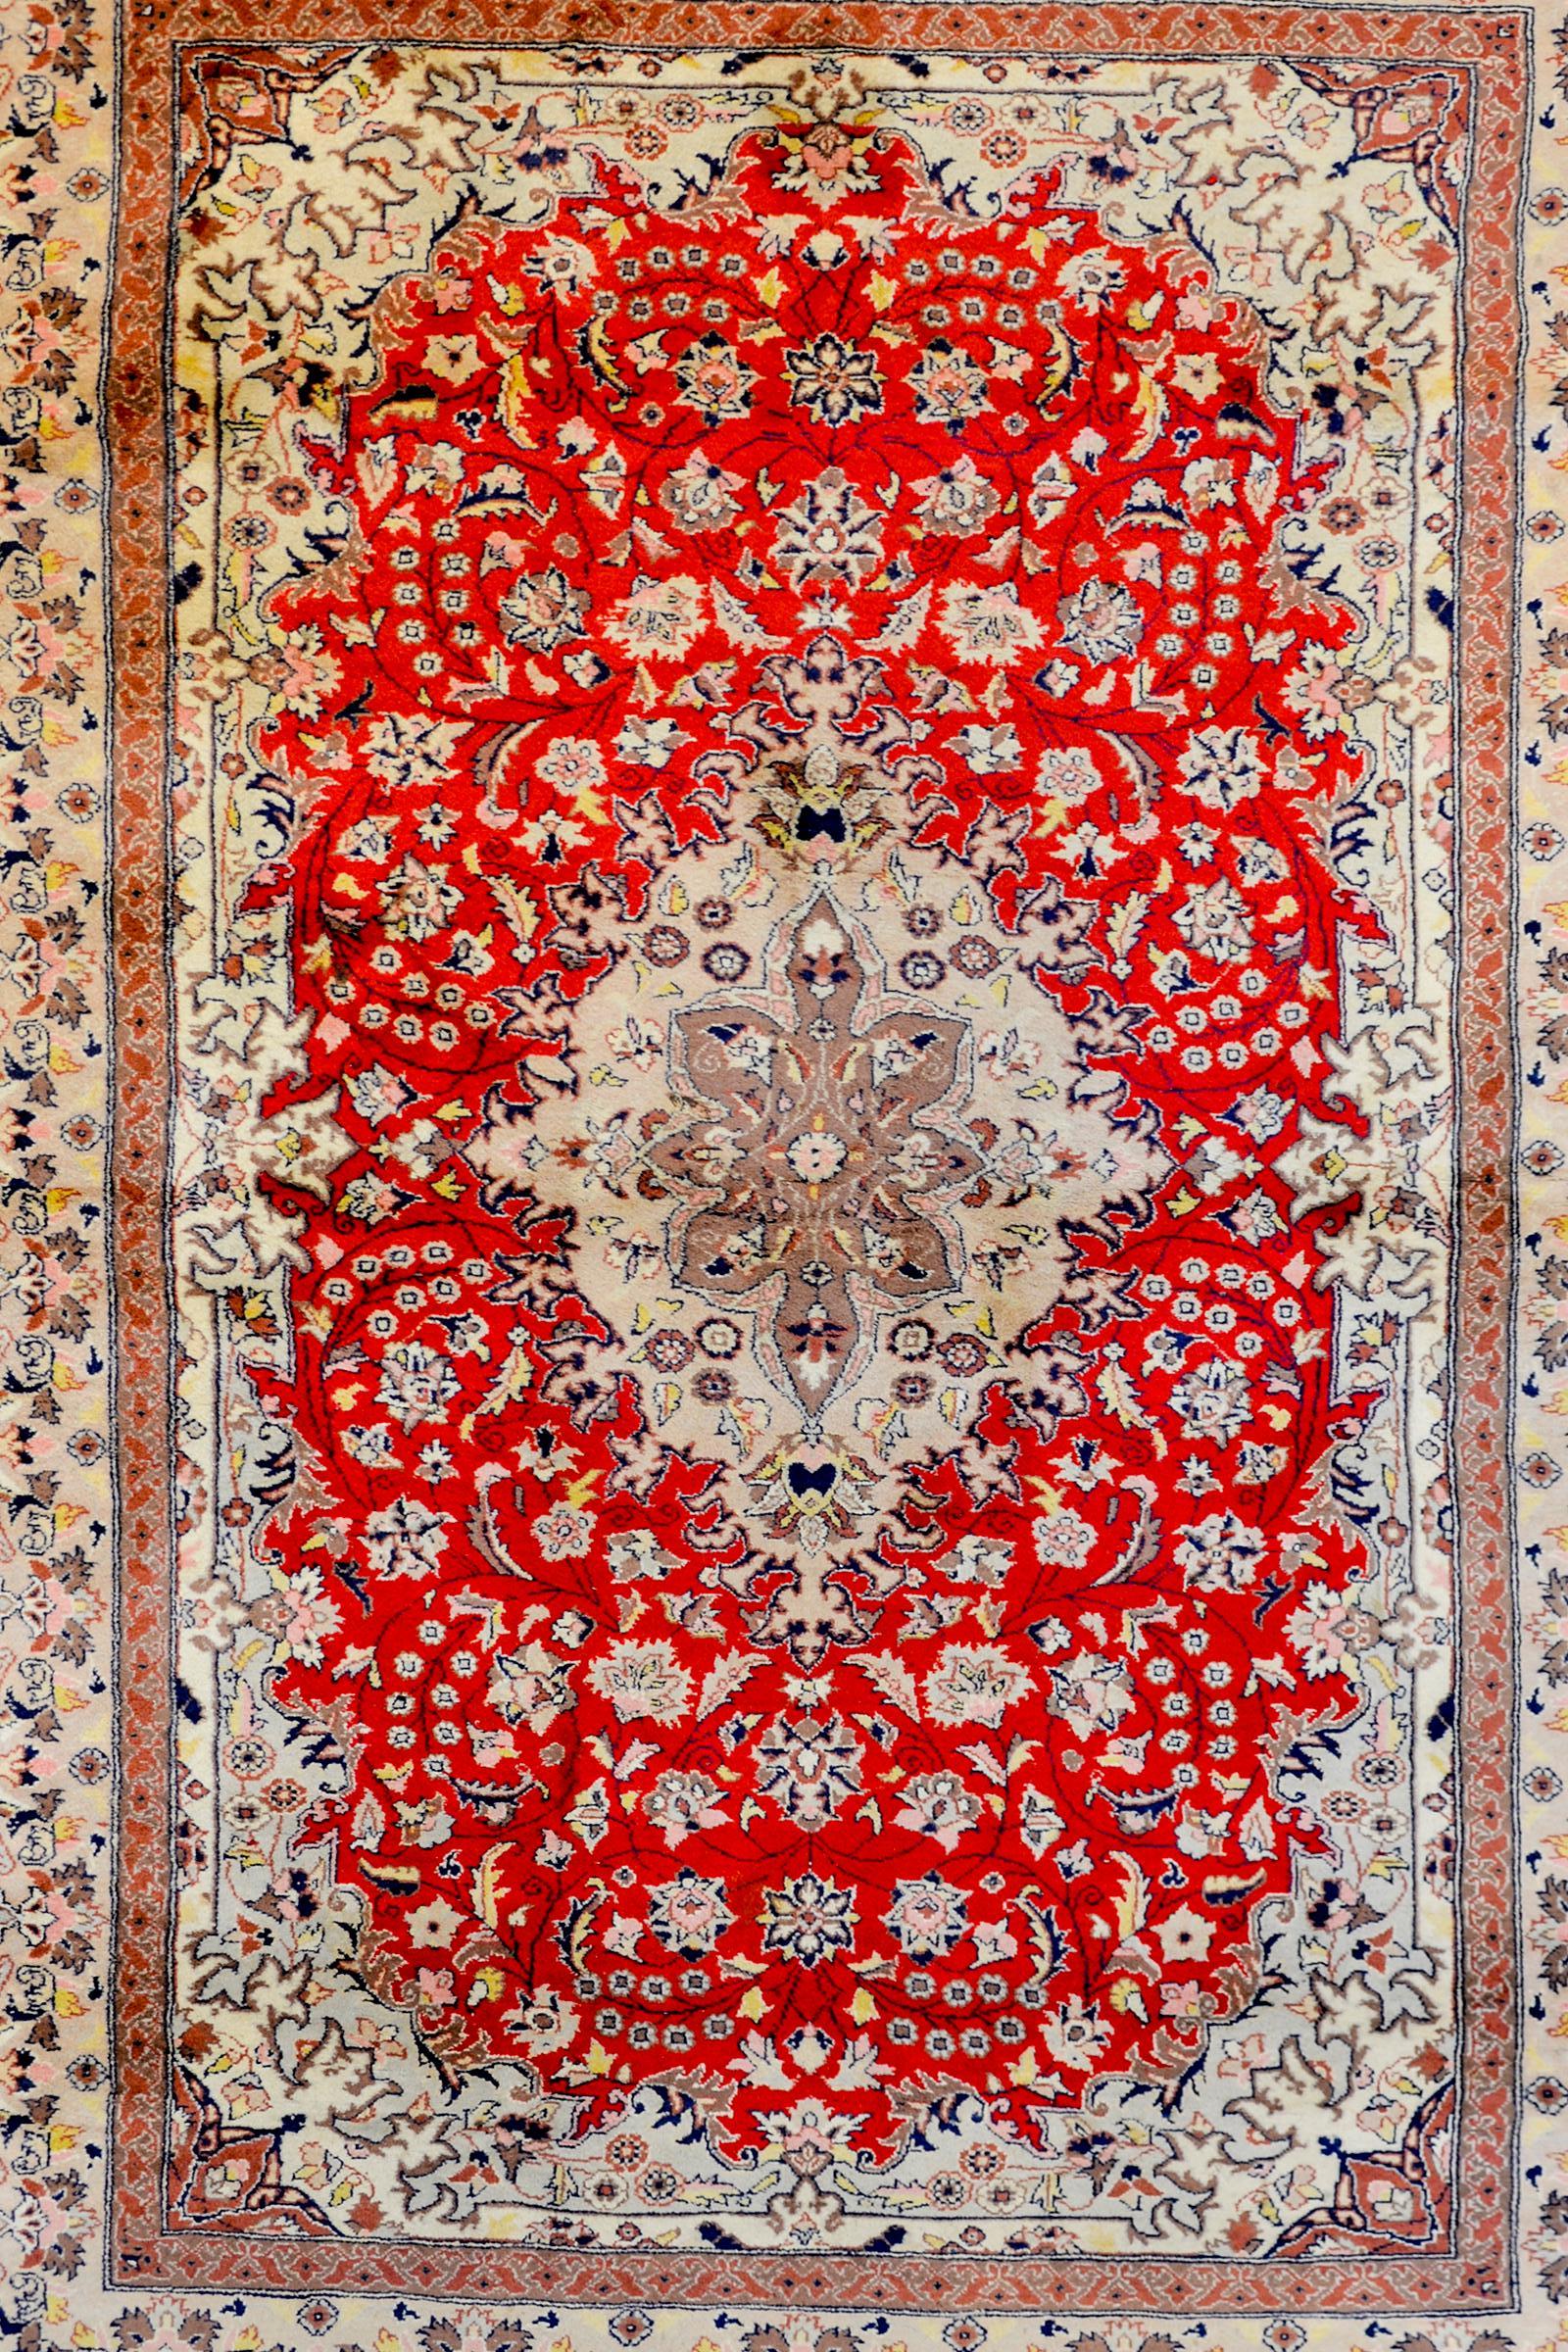 A bold vintage Chinese Tabriz-style rug with a large central floral medallion on a crimson field of scrolling vines, leaves, and flowers, surrounded by a wide floral and vine patterned border, flanked by pairs of matching petite floral patterned